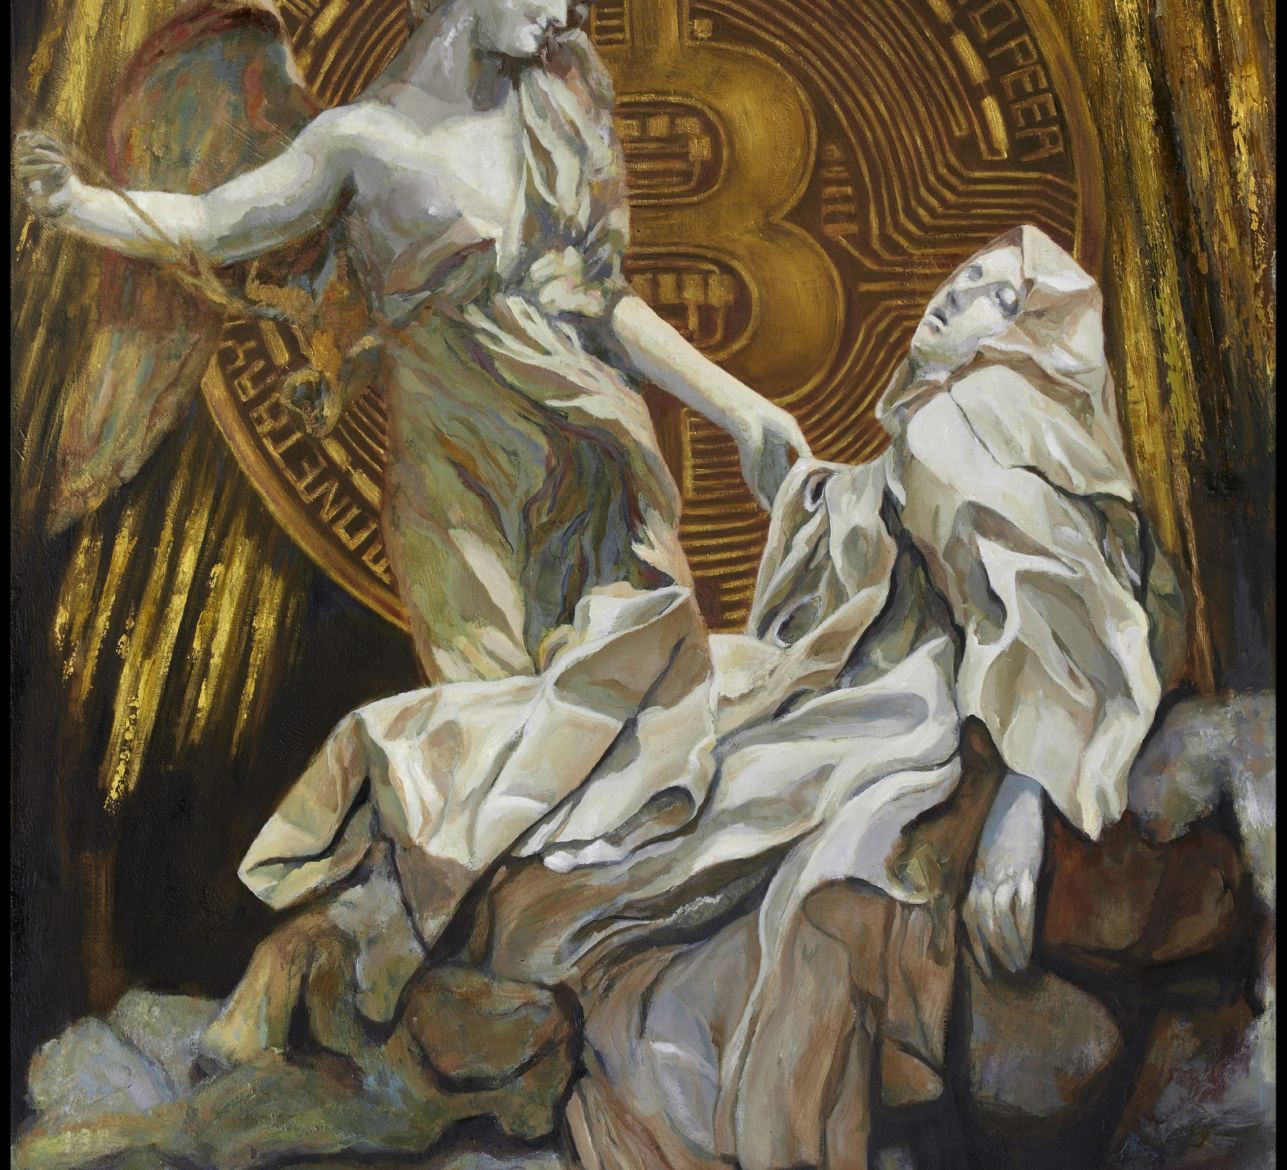 The Bitcoin Angel (Open Edition) #379/4157